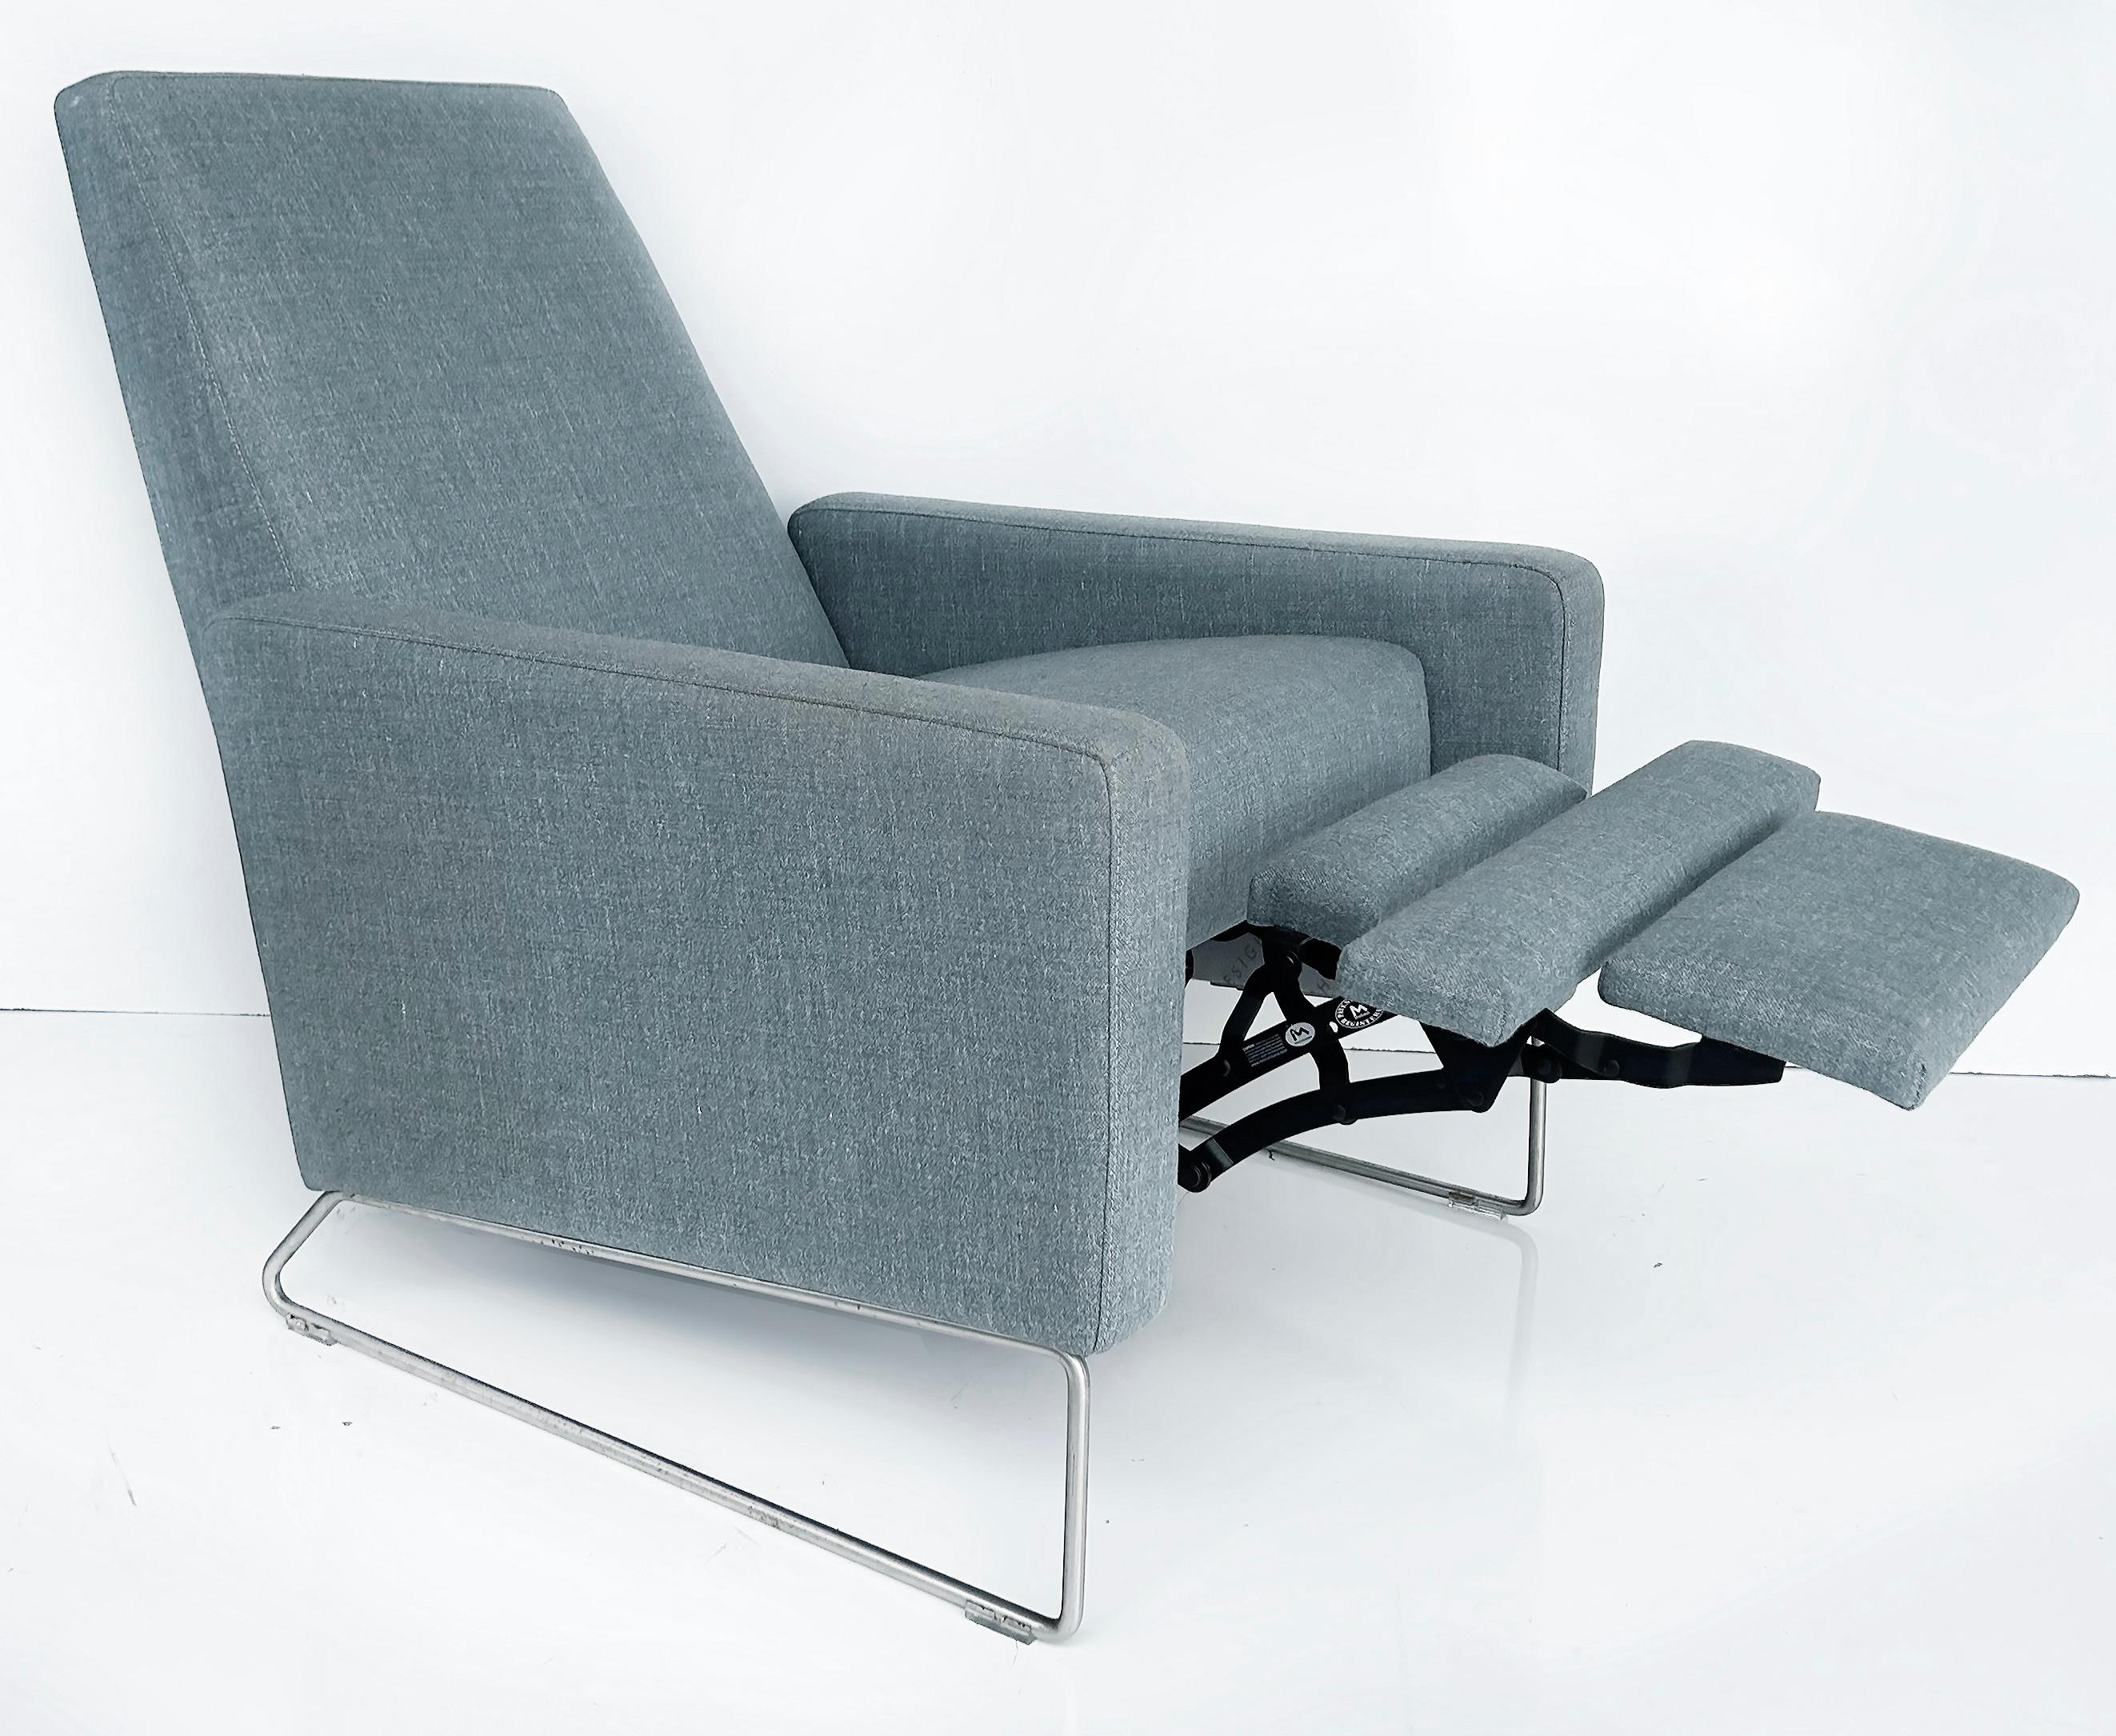 Design Within Reach Flight Recliner, Stainless Steel and Linen Fabric

Offered for sale is a Jeffrey Bernett and Nicholas Dodziuk designed 